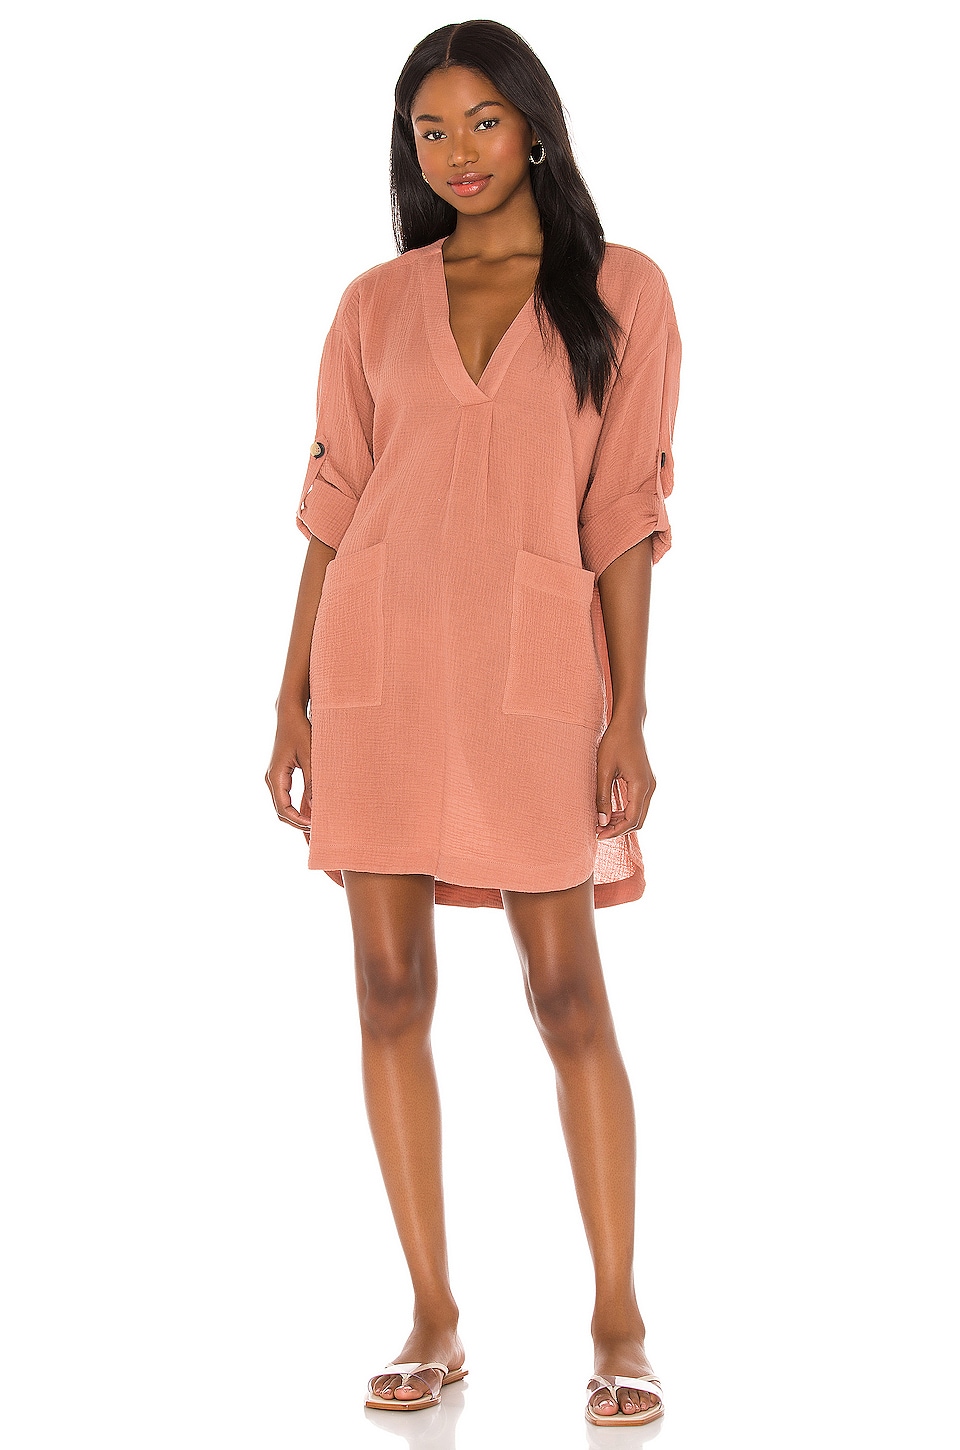 Seafolly Essential Cover Up Online, SAVE 36% 